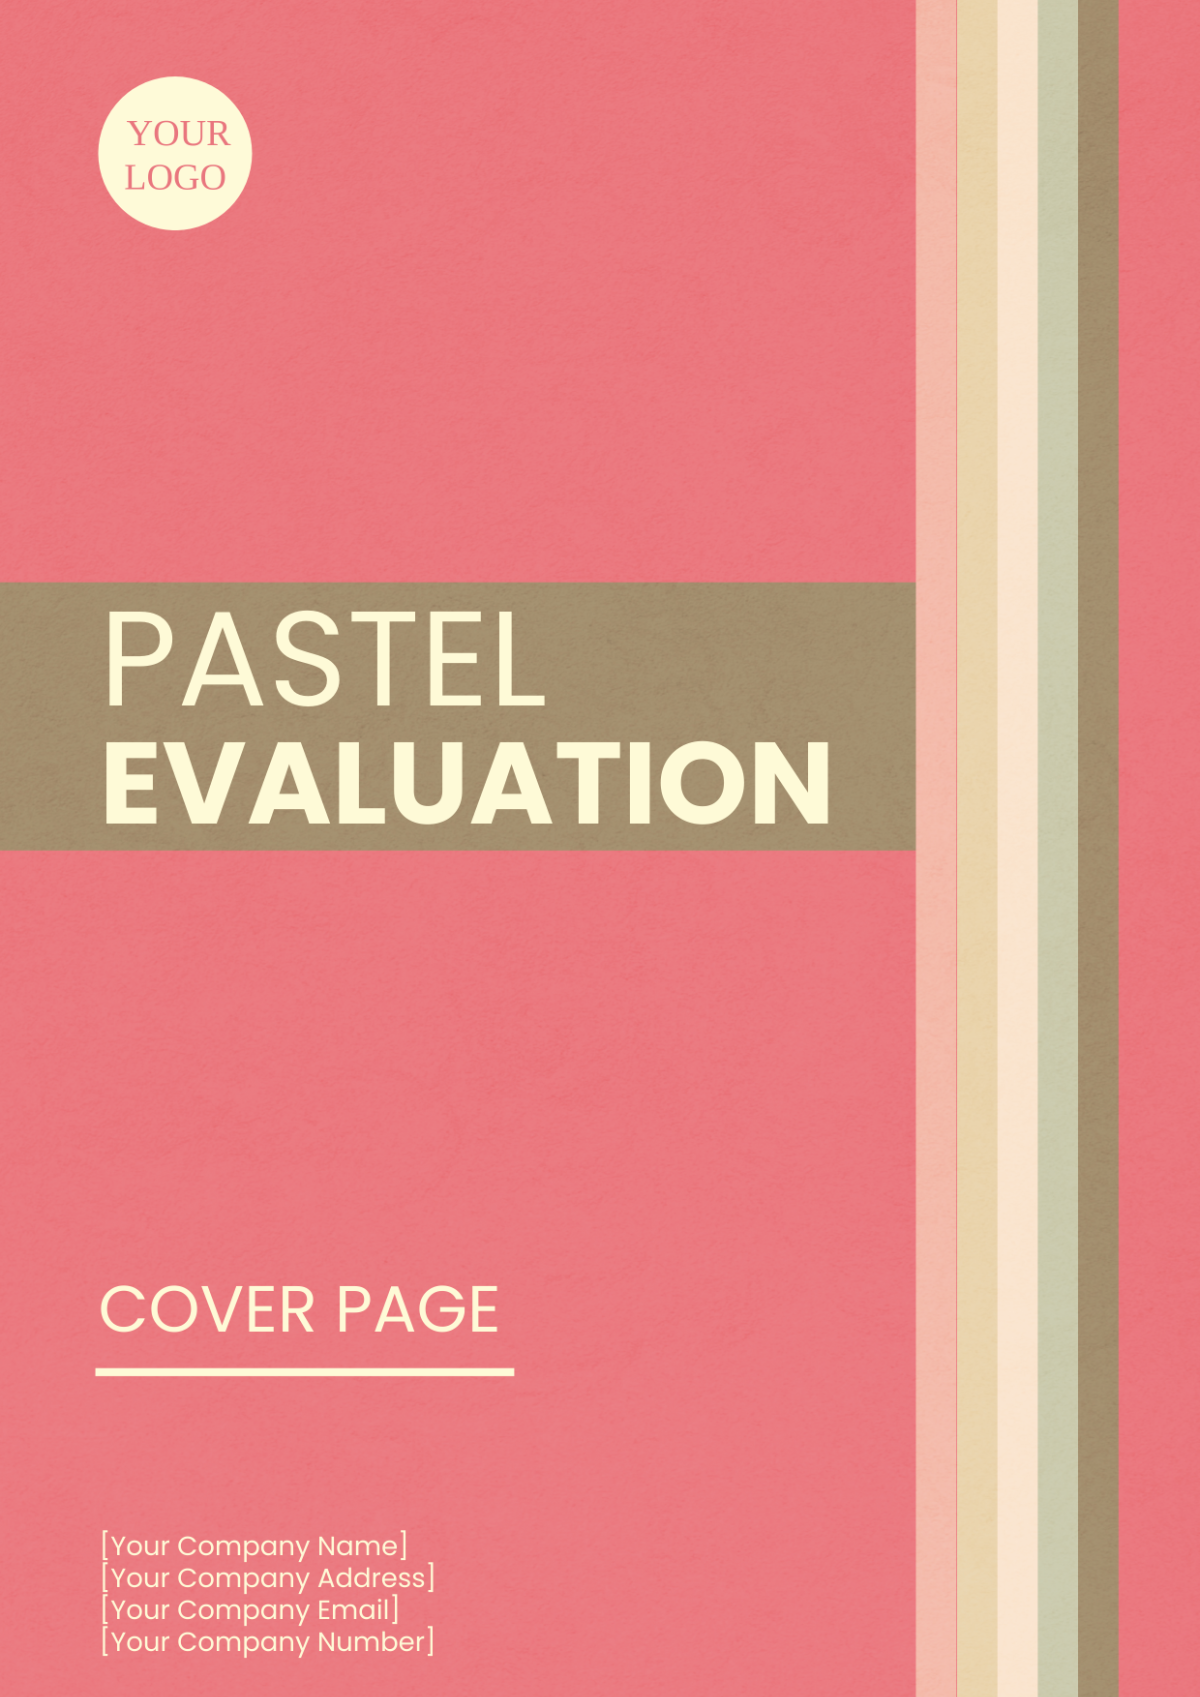 Pastel Evaluation Cover Page